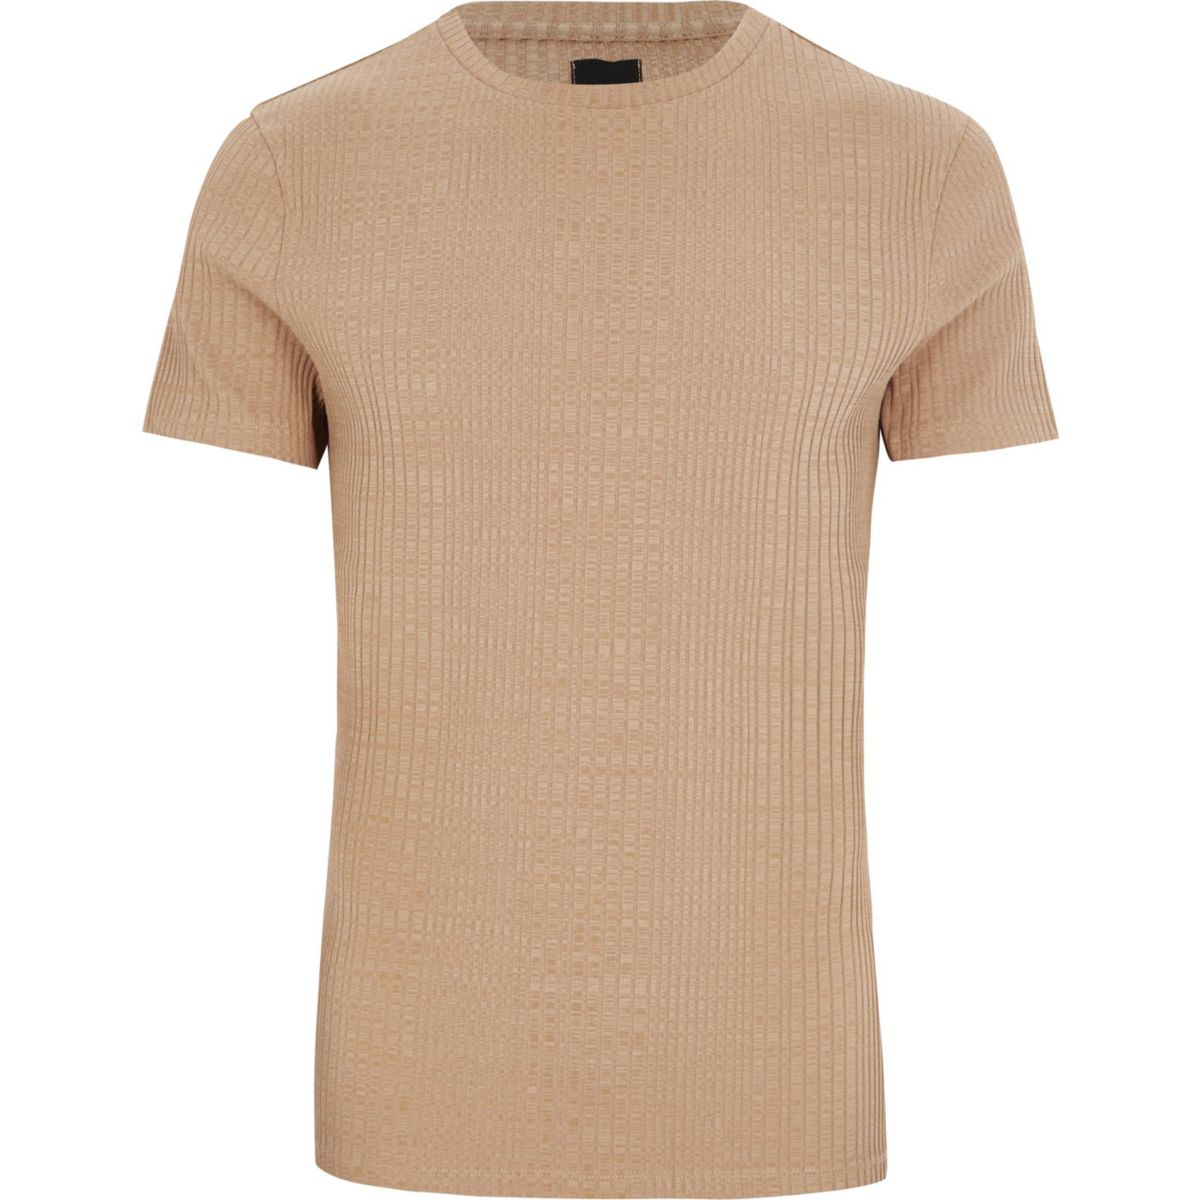 Big and Tall light brown ribbed T-shirt - T-Shirts & Vests - Sale - men